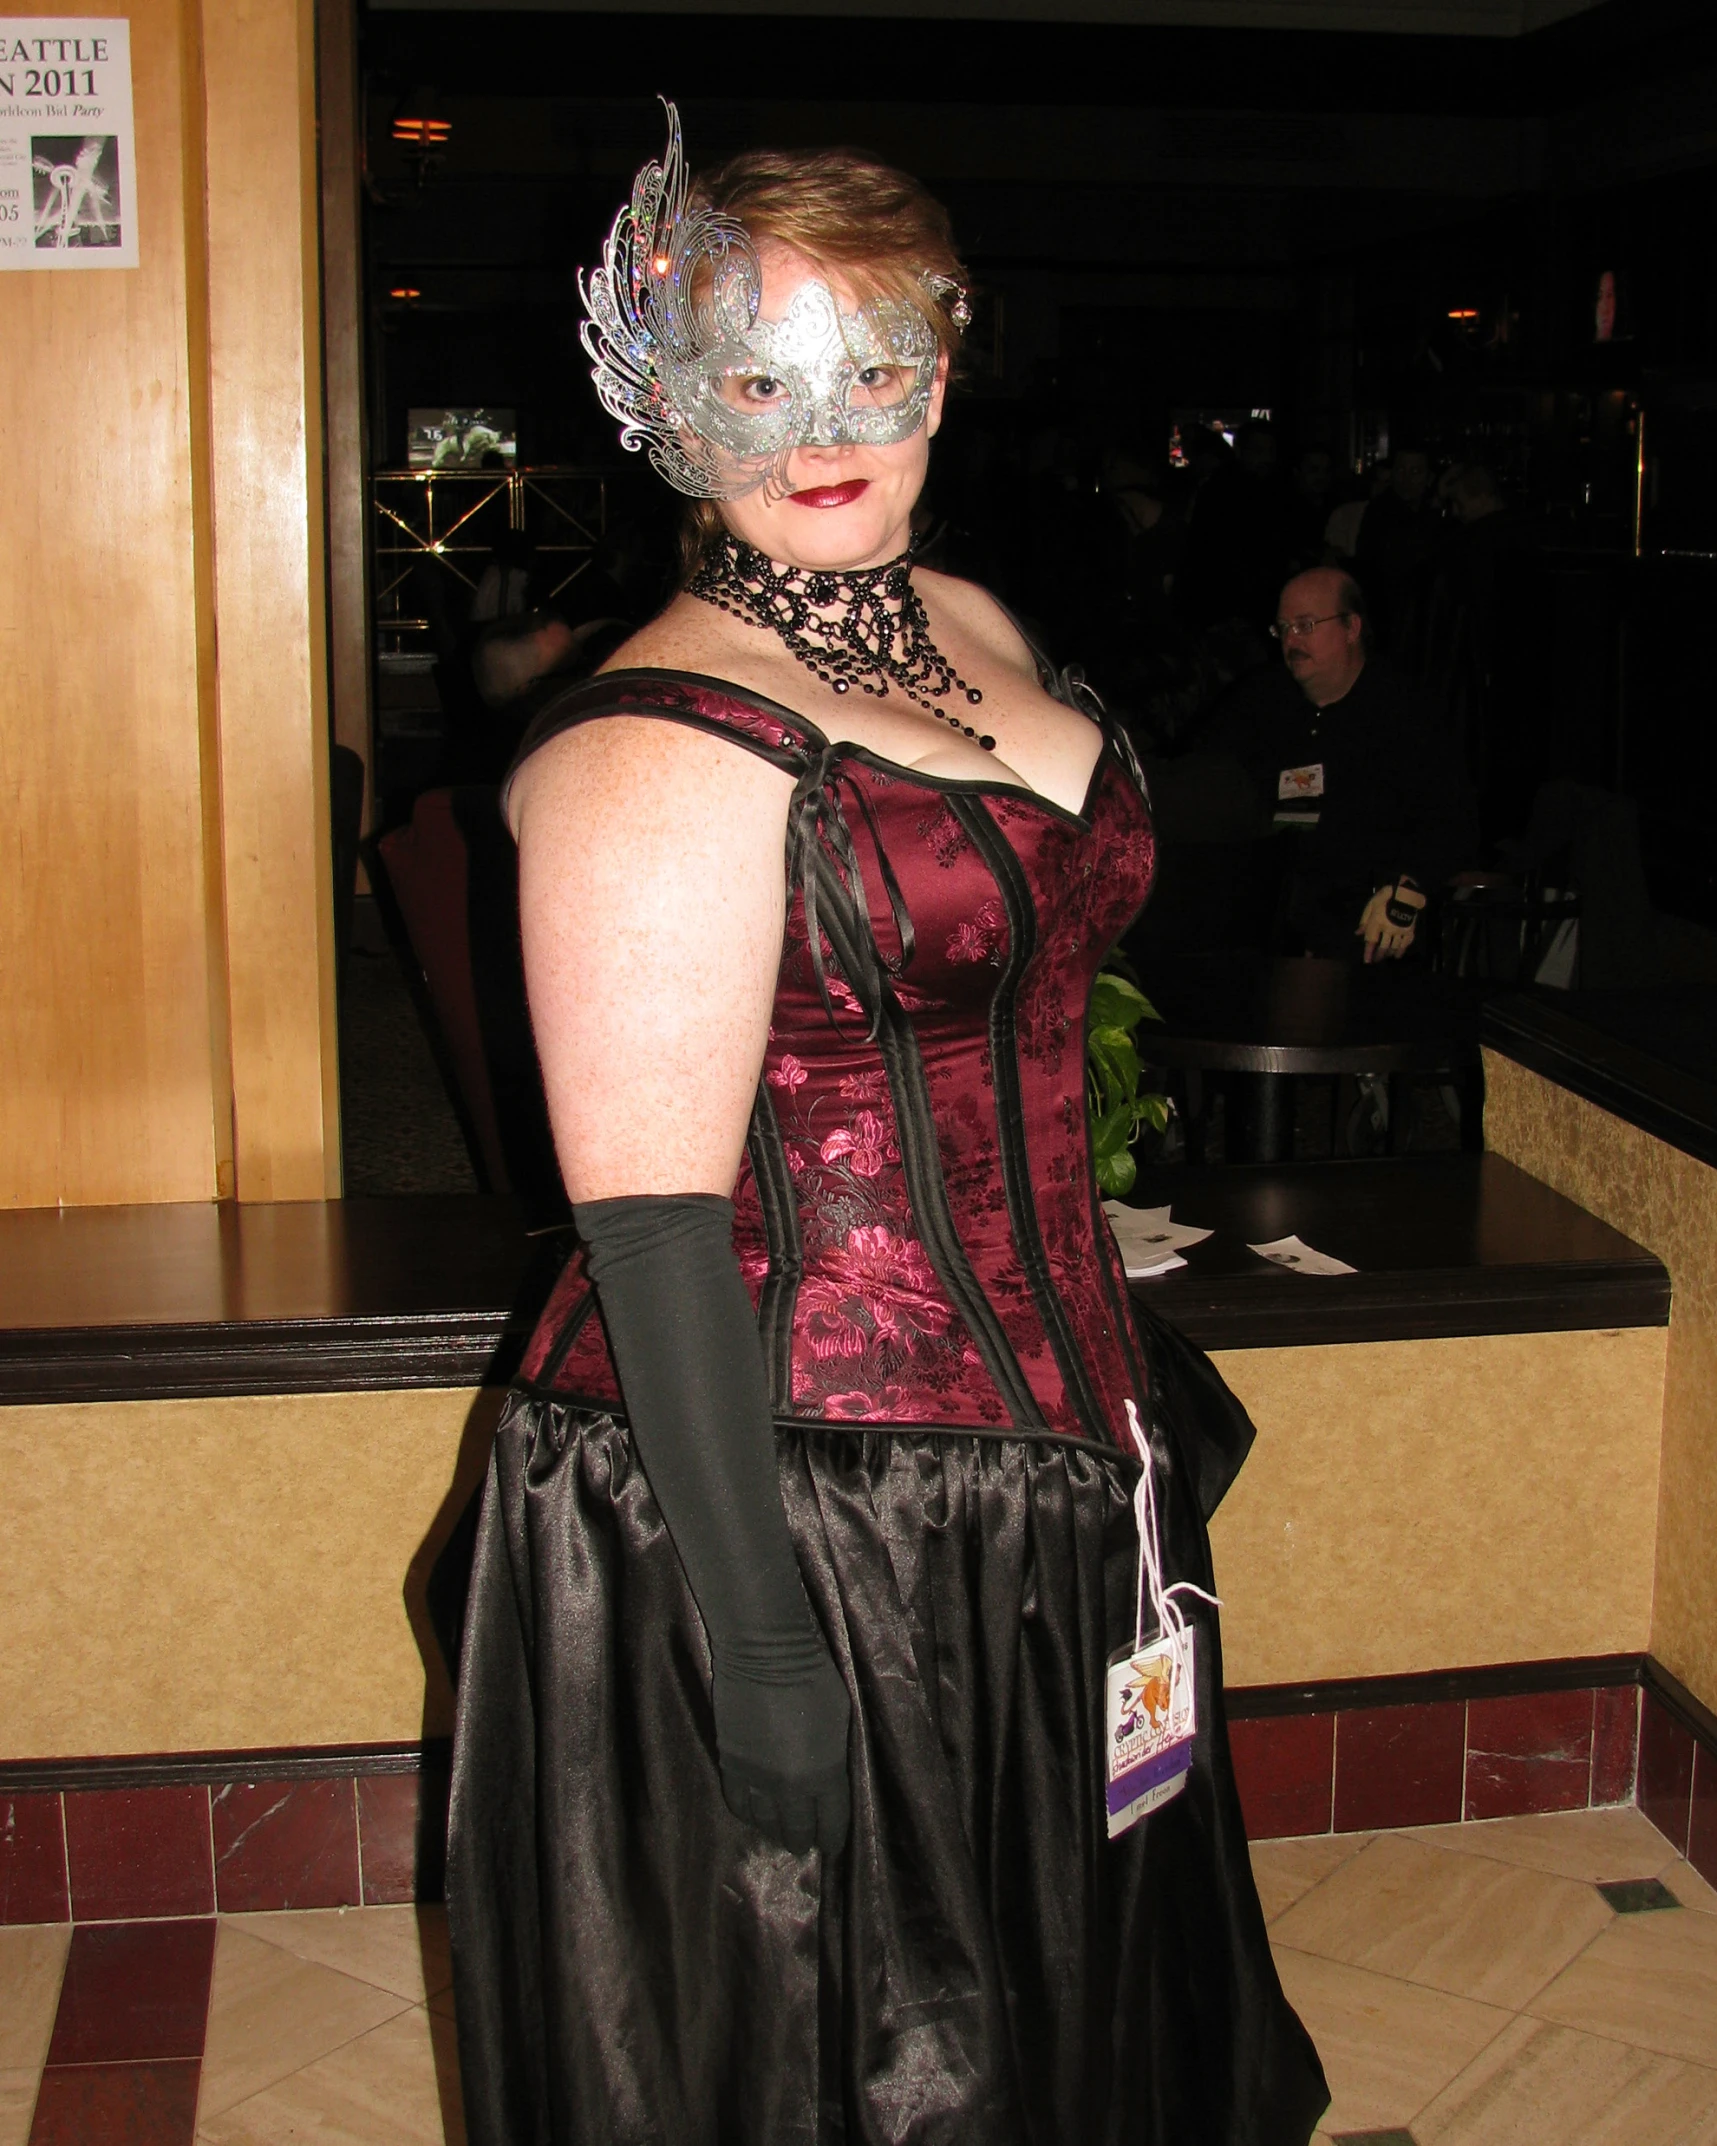 a woman in an old - fashioned red dress wearing a mask